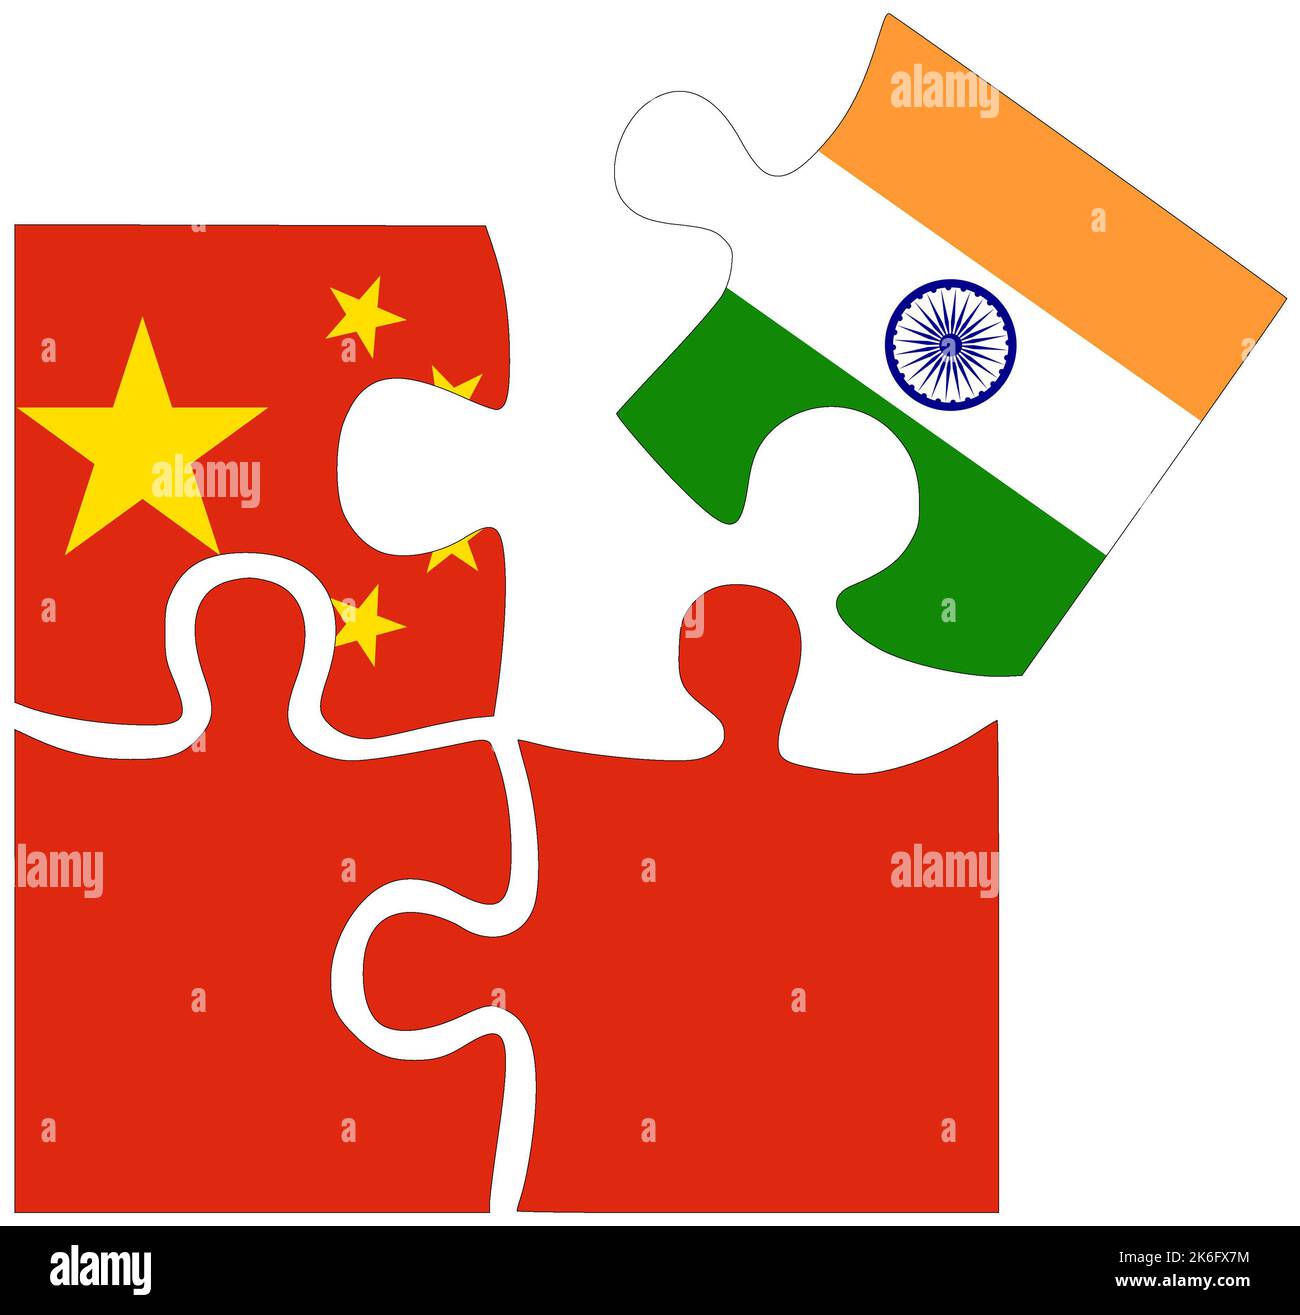 China - India : puzzle shapes with flags, symbol of agreement or friendship Stock Photo